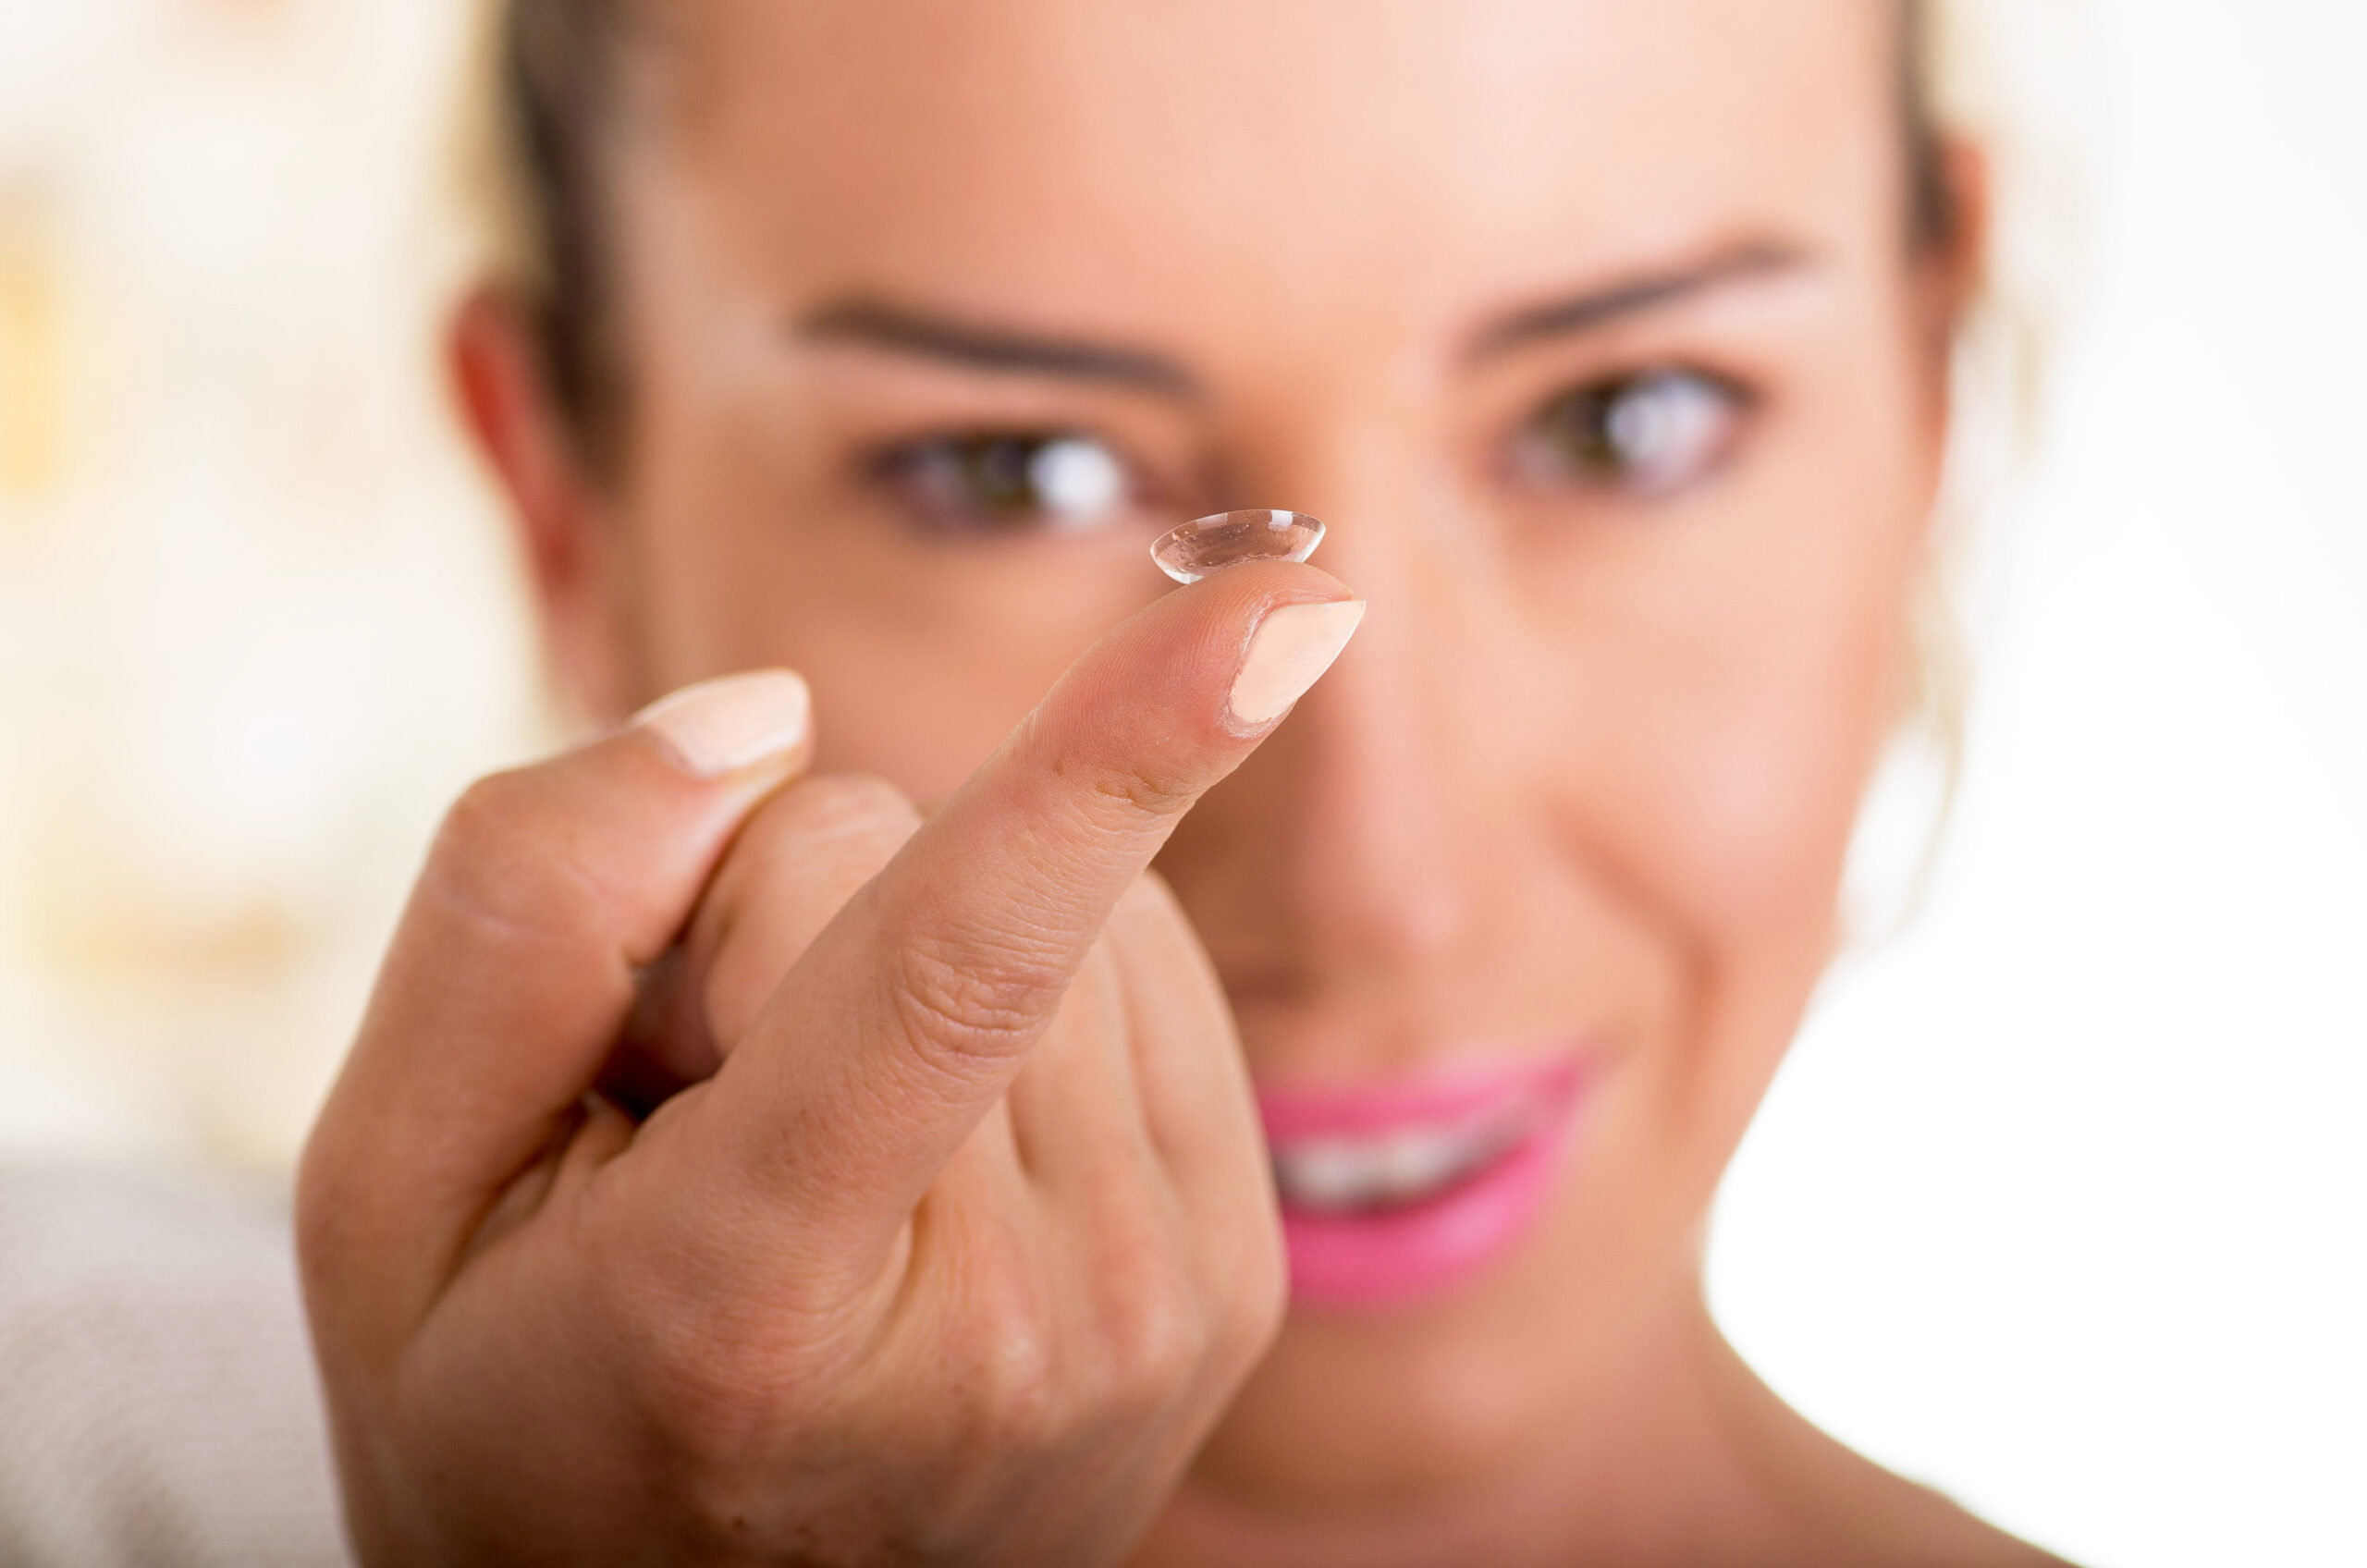 Contact lenses; a solution adapted for every condition